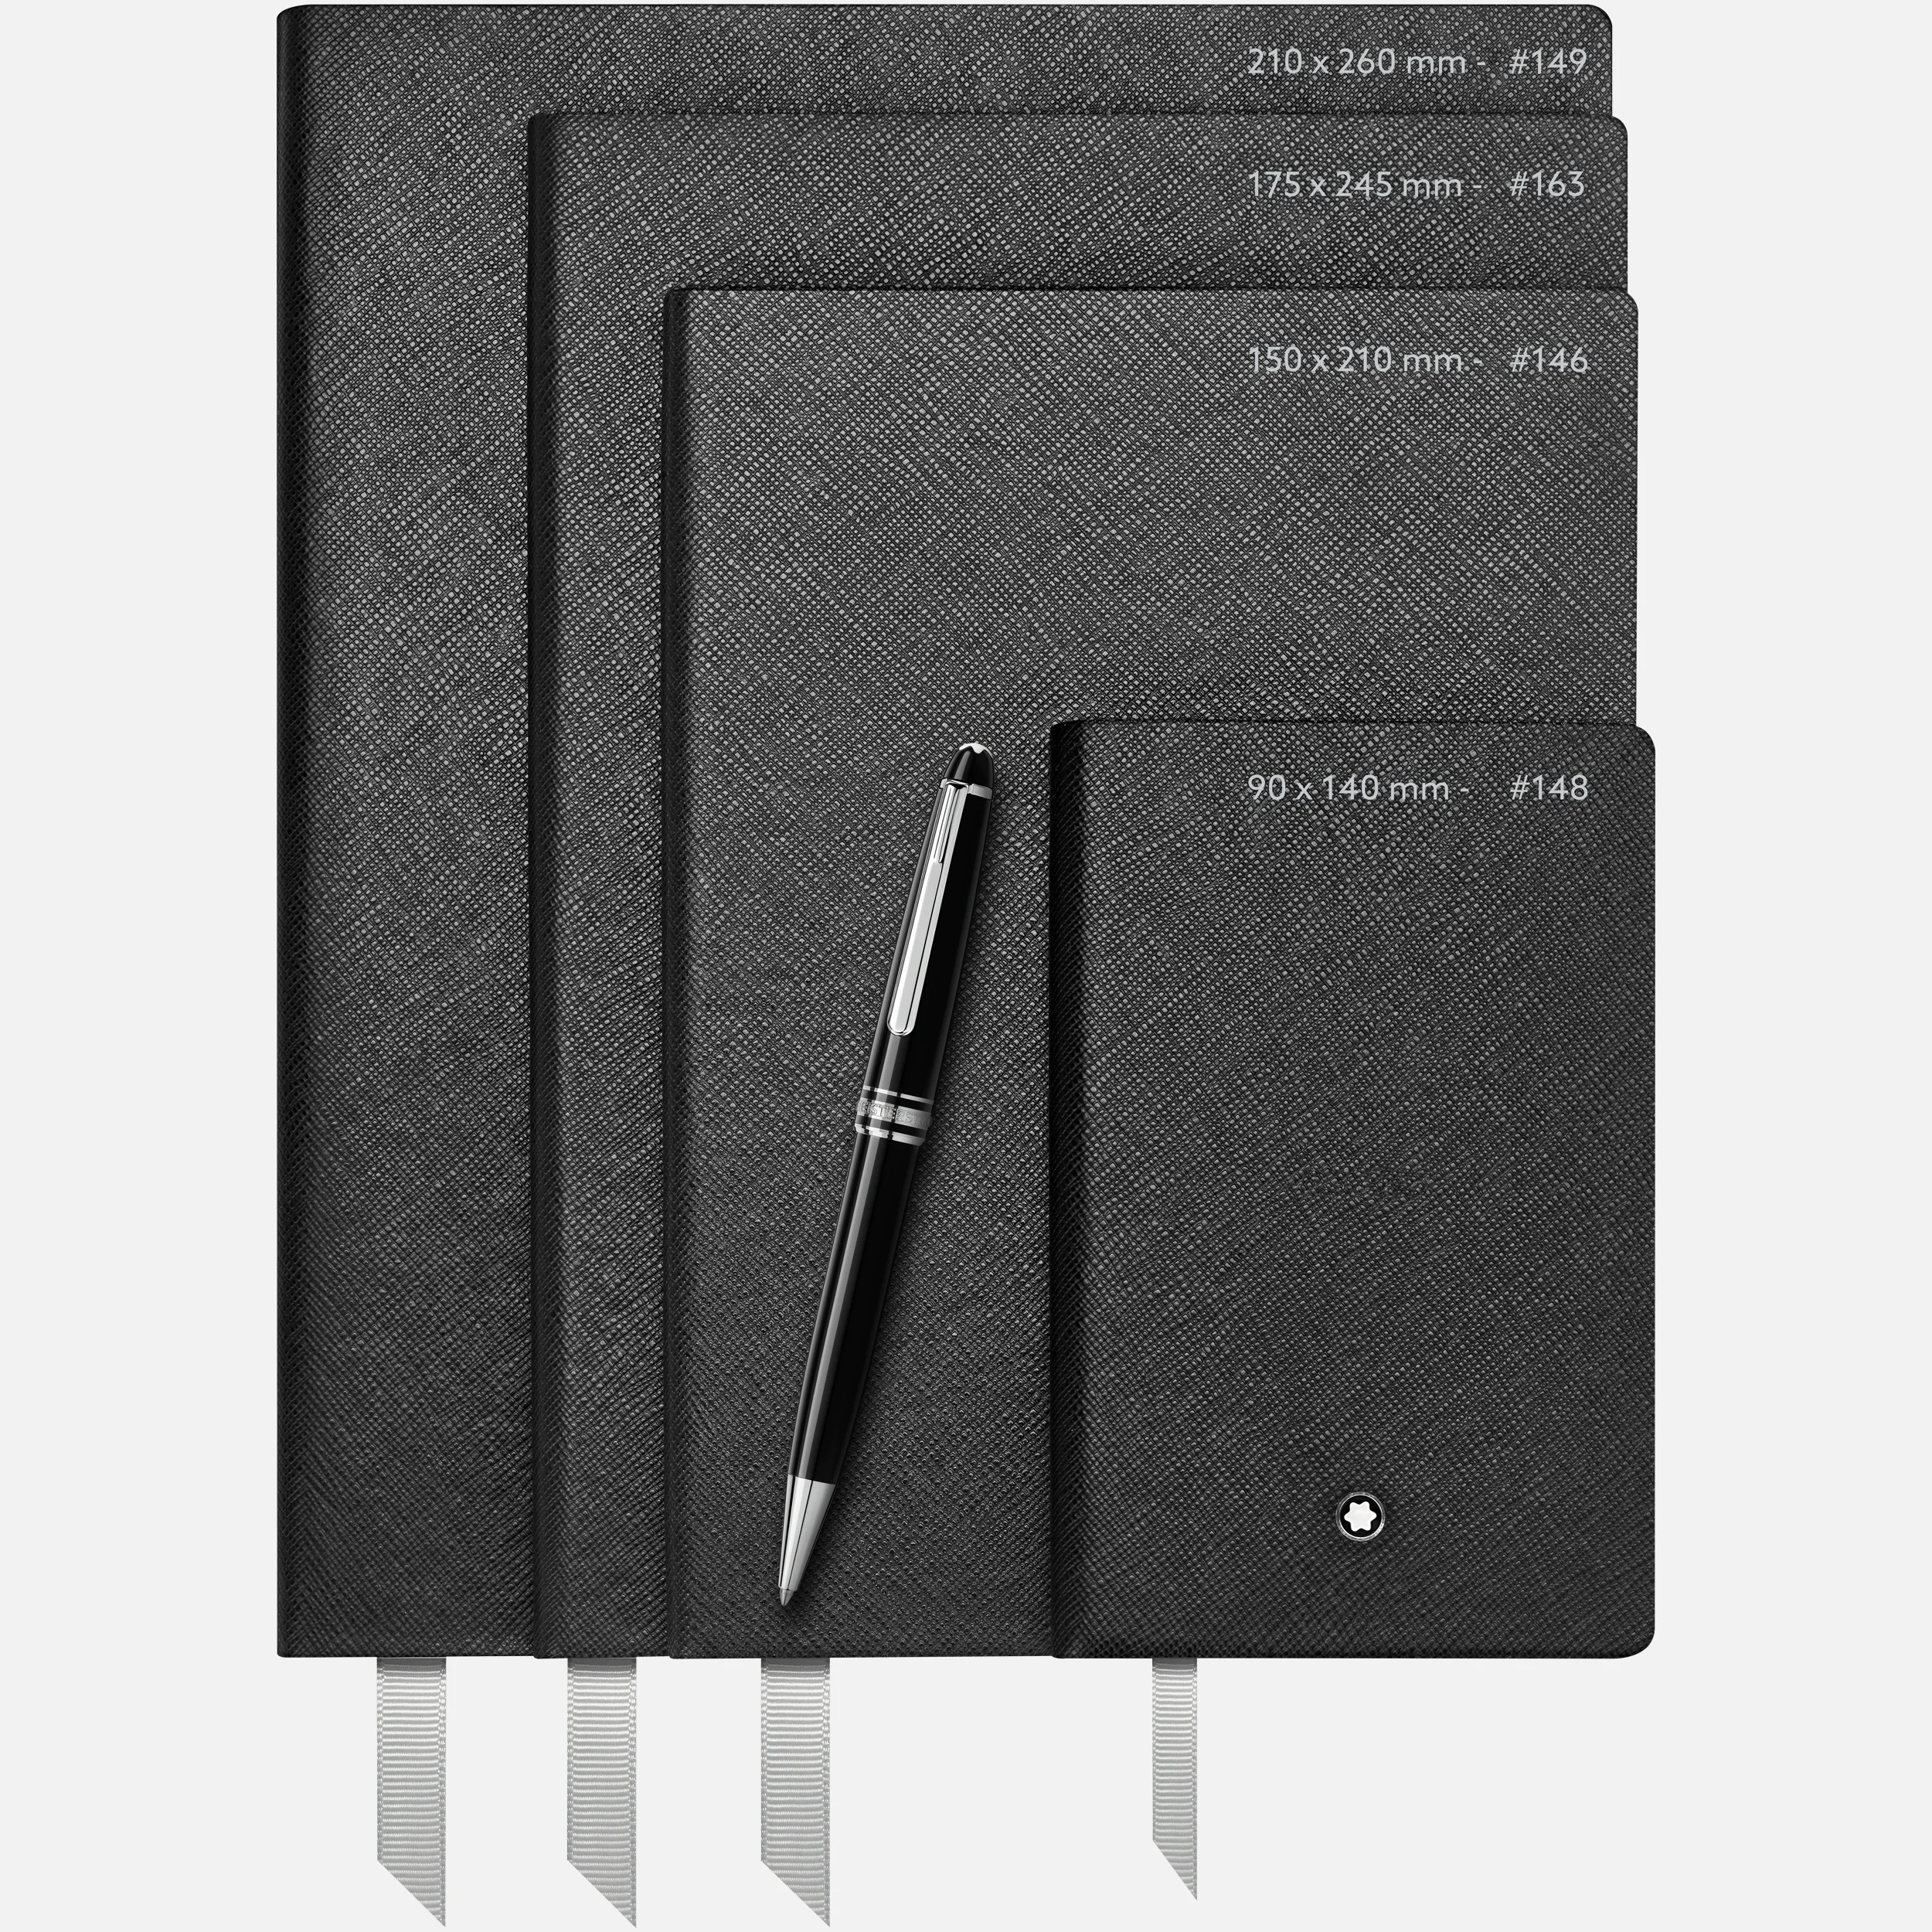 Montblanc Fine Stationery Notebook 146 Black Lined - Pencraft the boutique